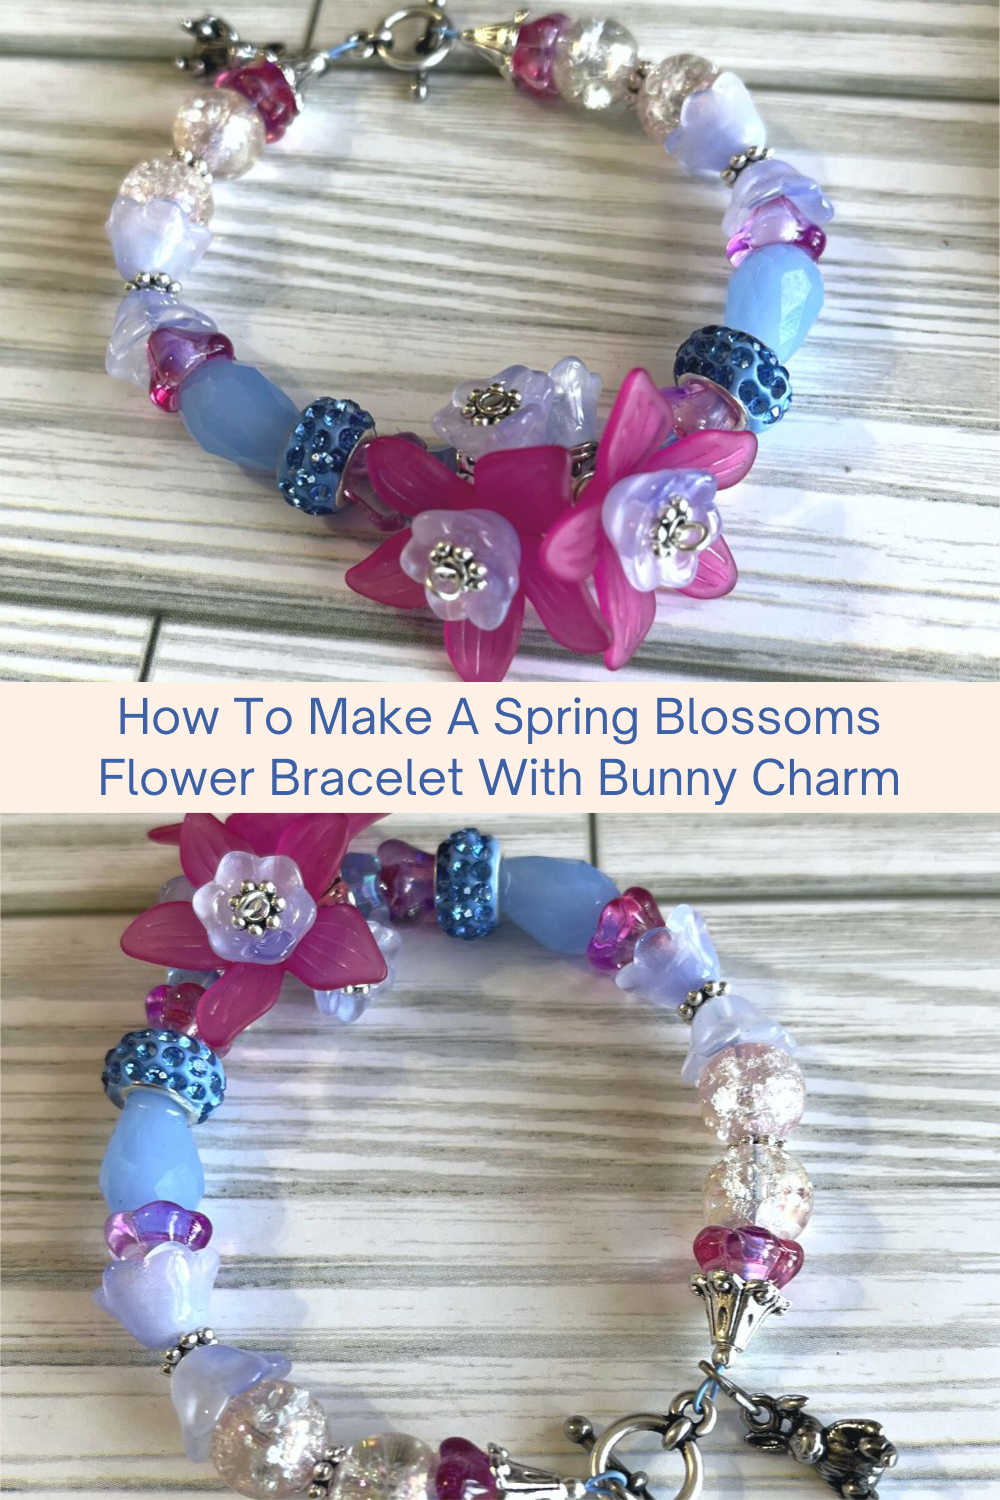 How To Make A Spring Blossoms Flower Bracelet With Bunny Charm Collage